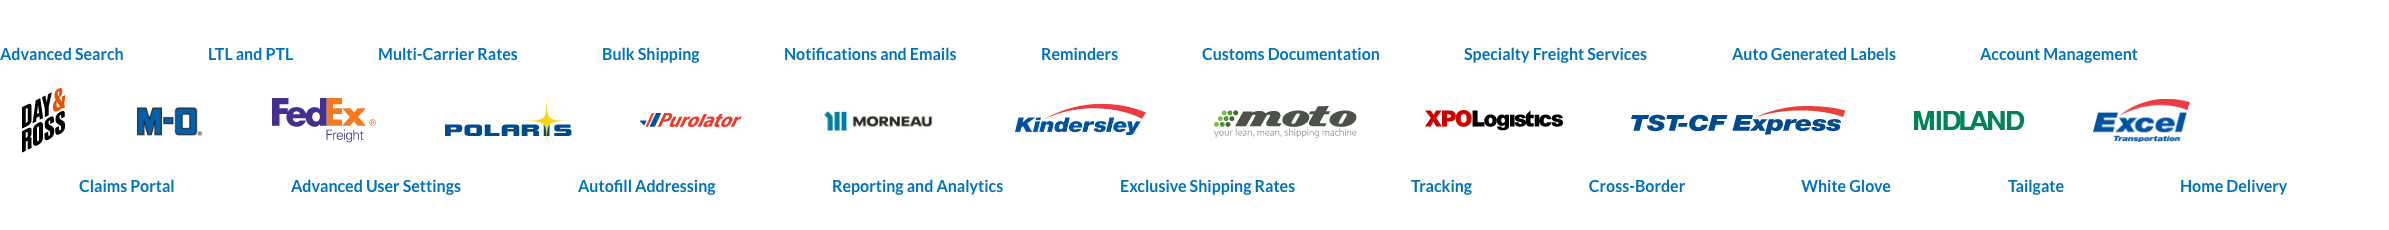 All in one shipping solution for LTL, Parcel, eCommerce & more